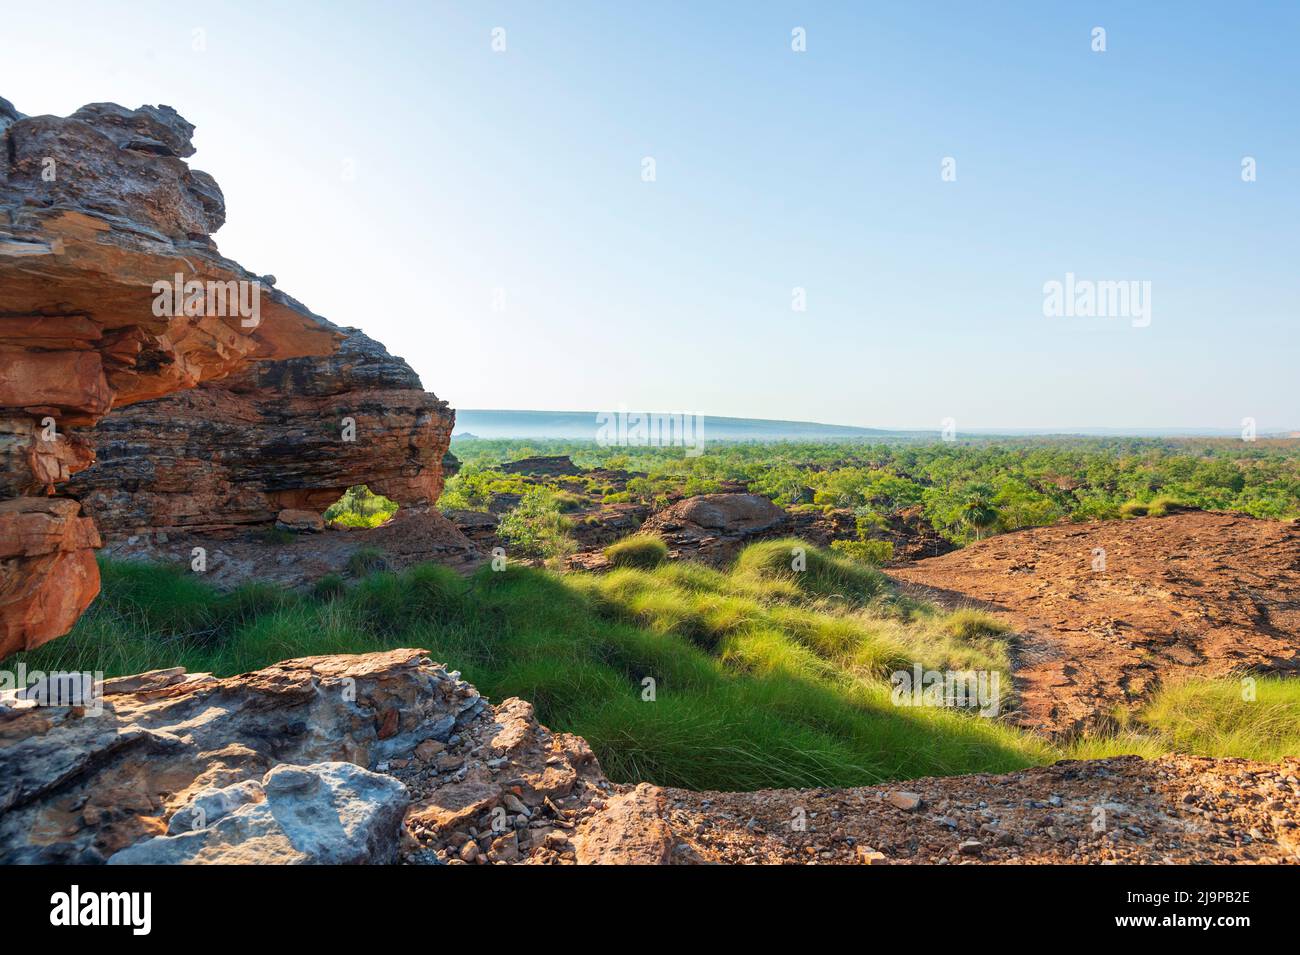 Scenic view of Keep River National Park, a popular tourist destination, Northern Territory, NT, Australia Stock Photo